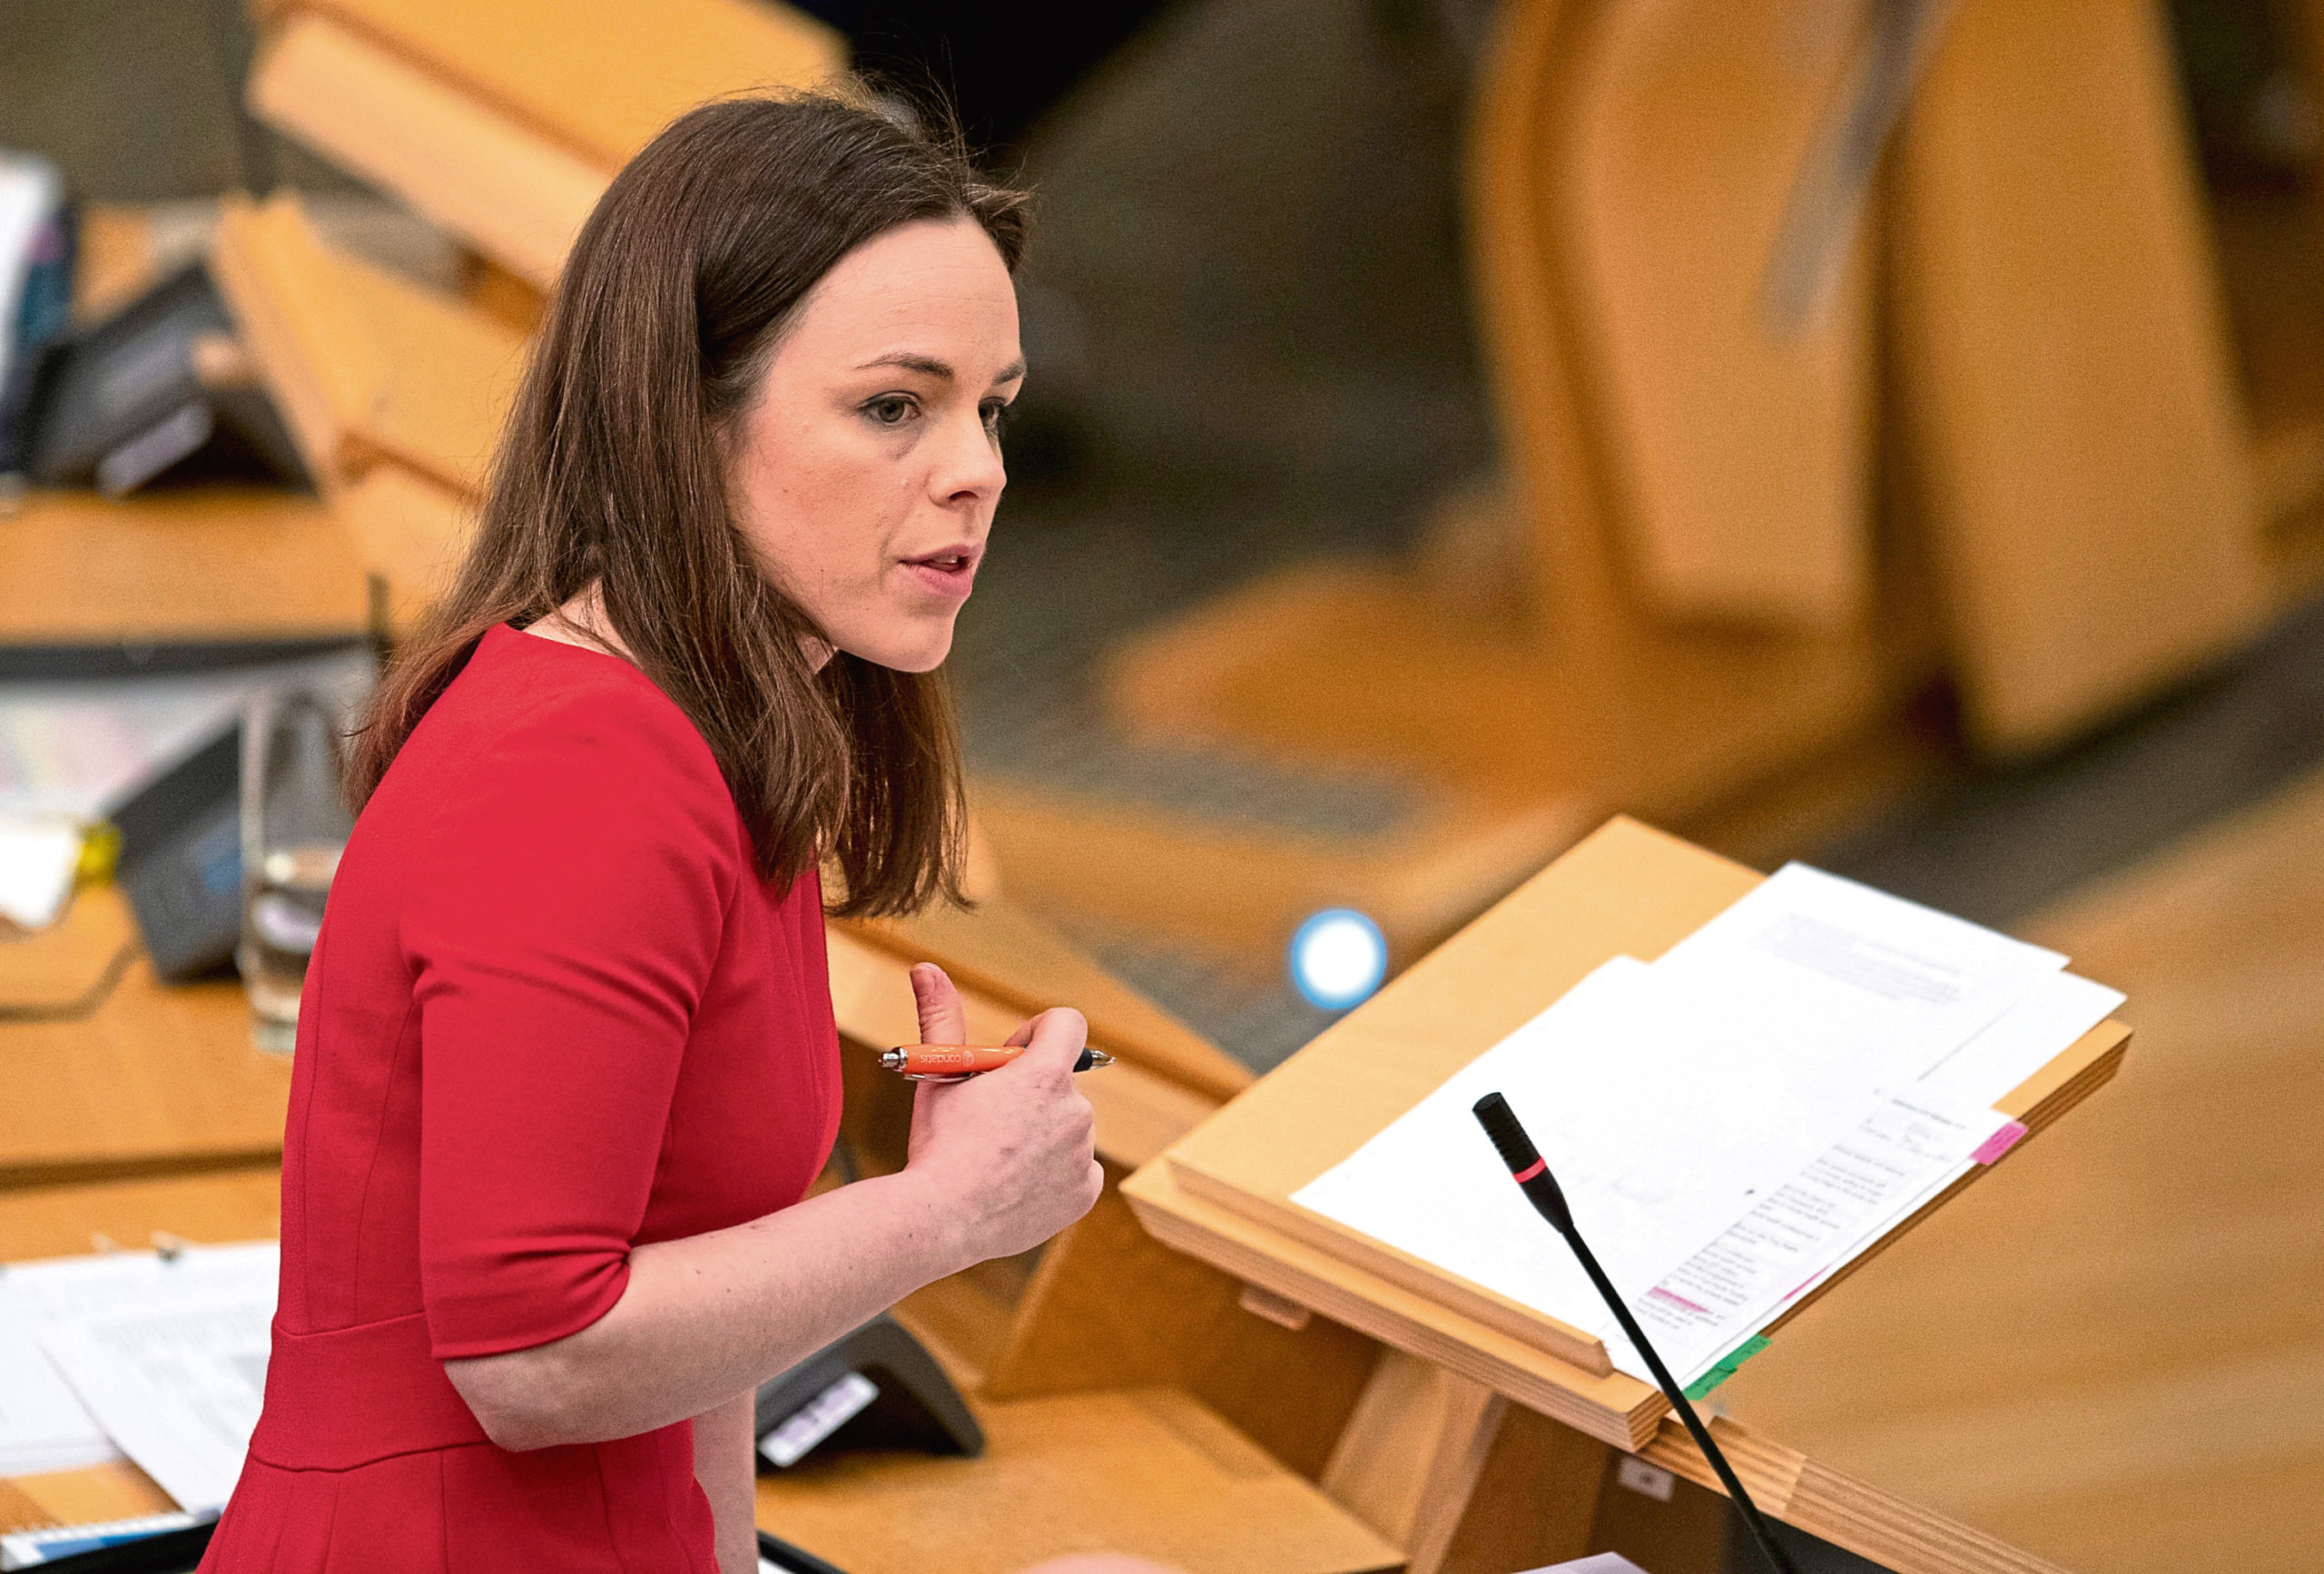 Kate Forbes' impressive performance in presenting the budget in circumstances has been rewarded with her being confirmed as Scotland's new finance secretary.